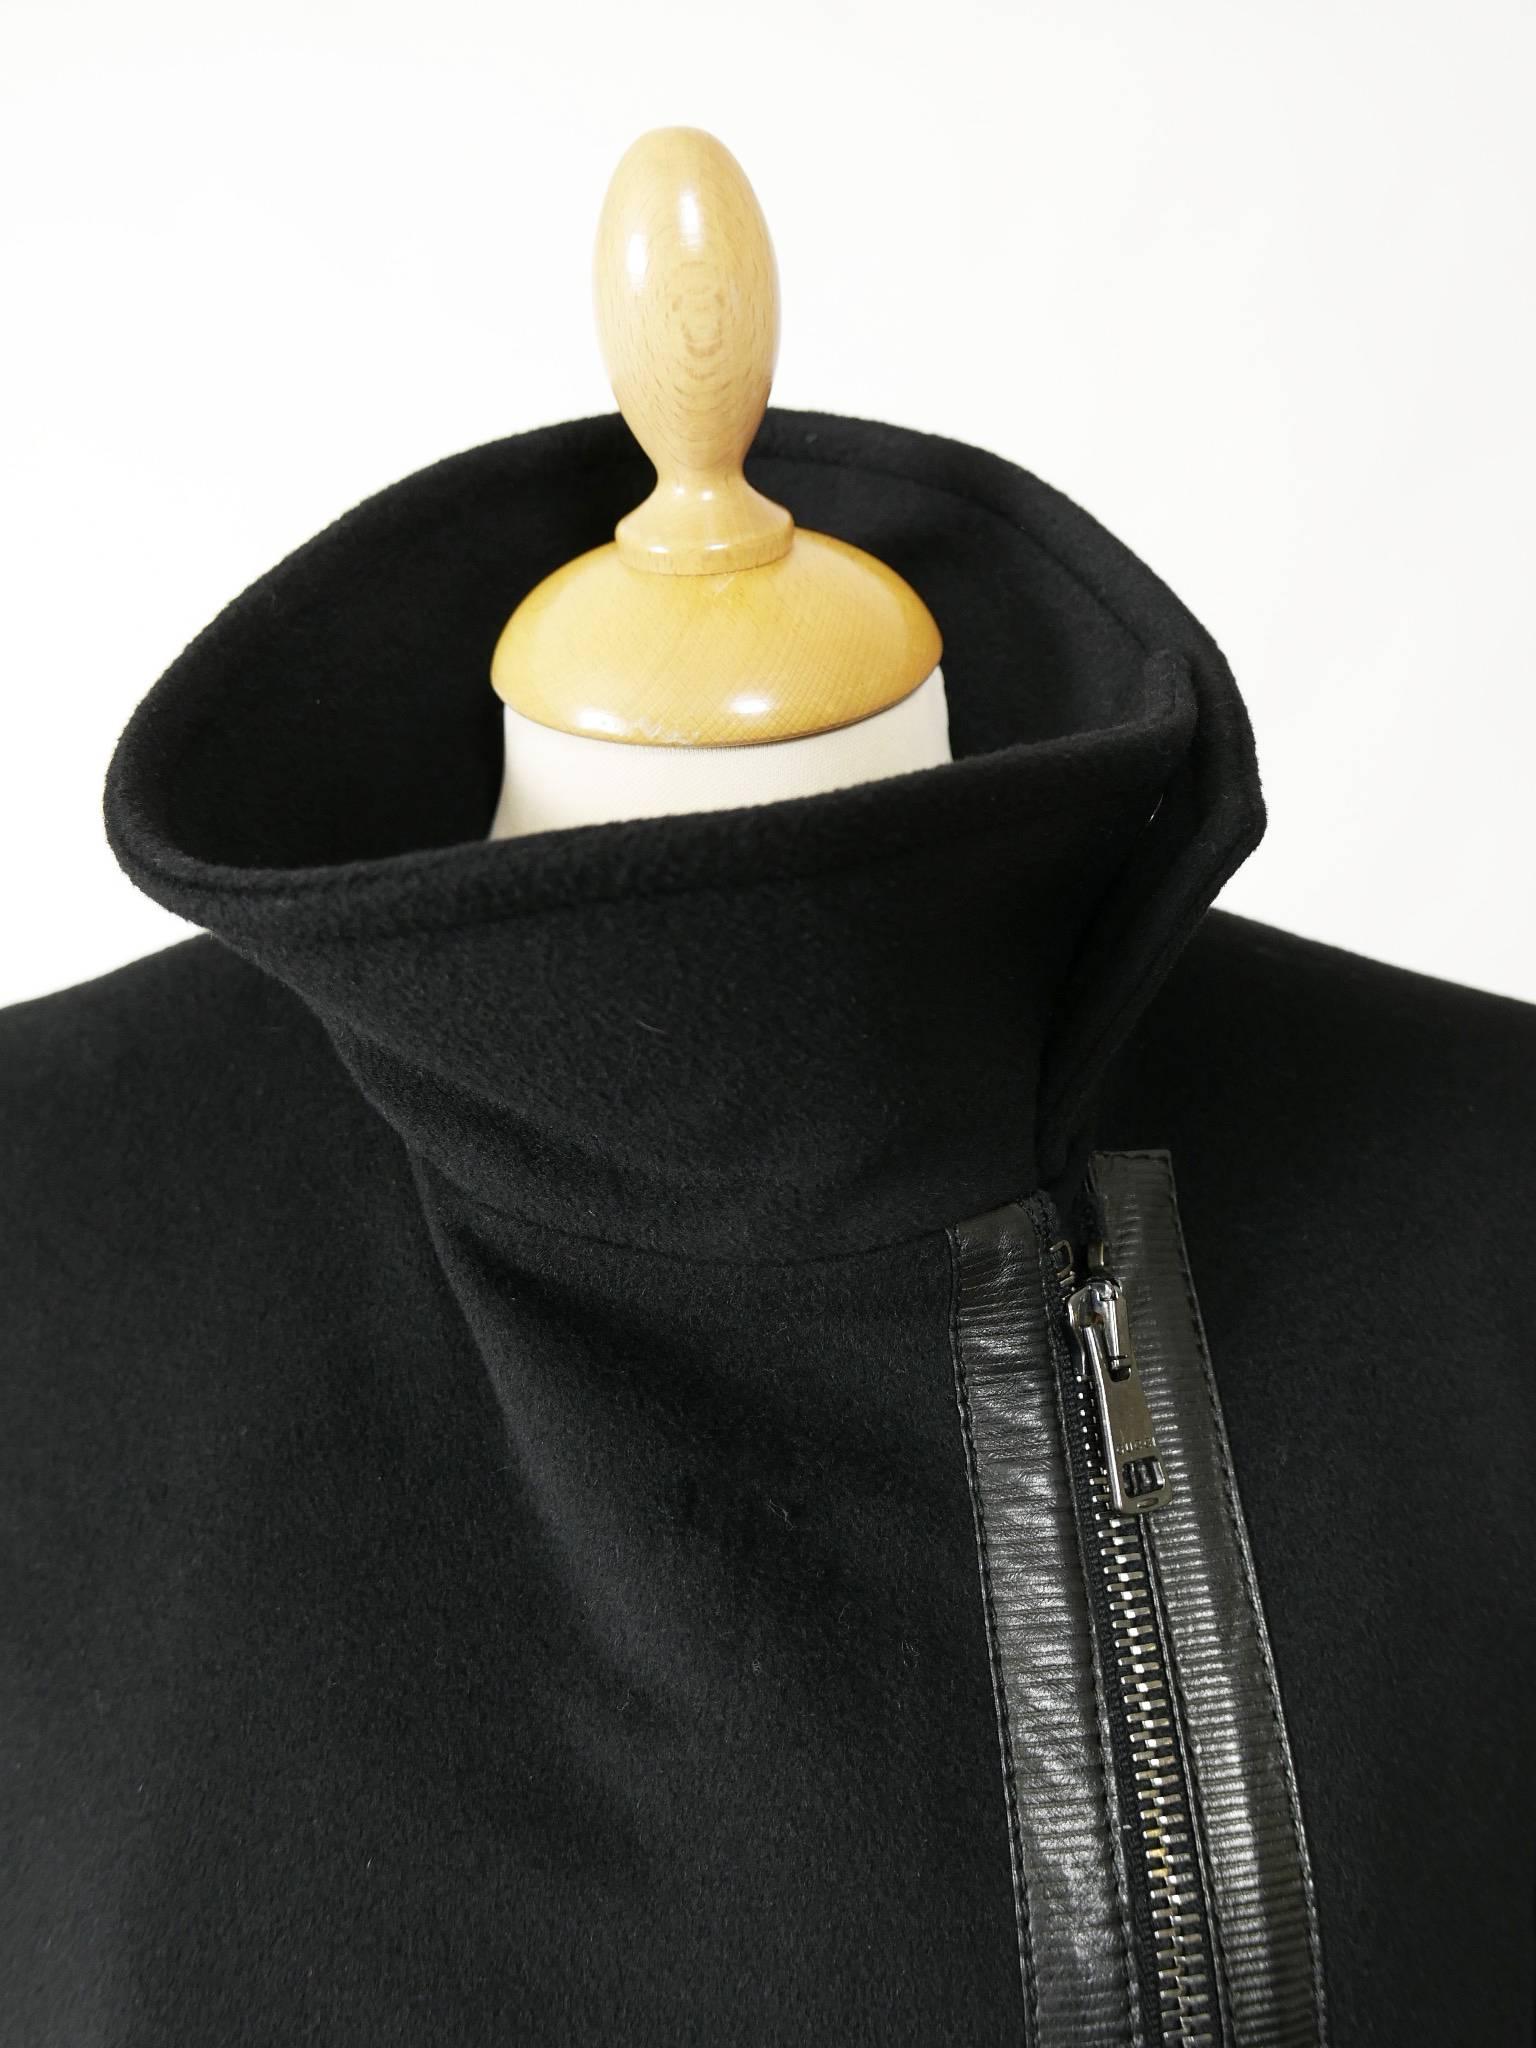 Gucci Made in Italy Black Wool Coat 3